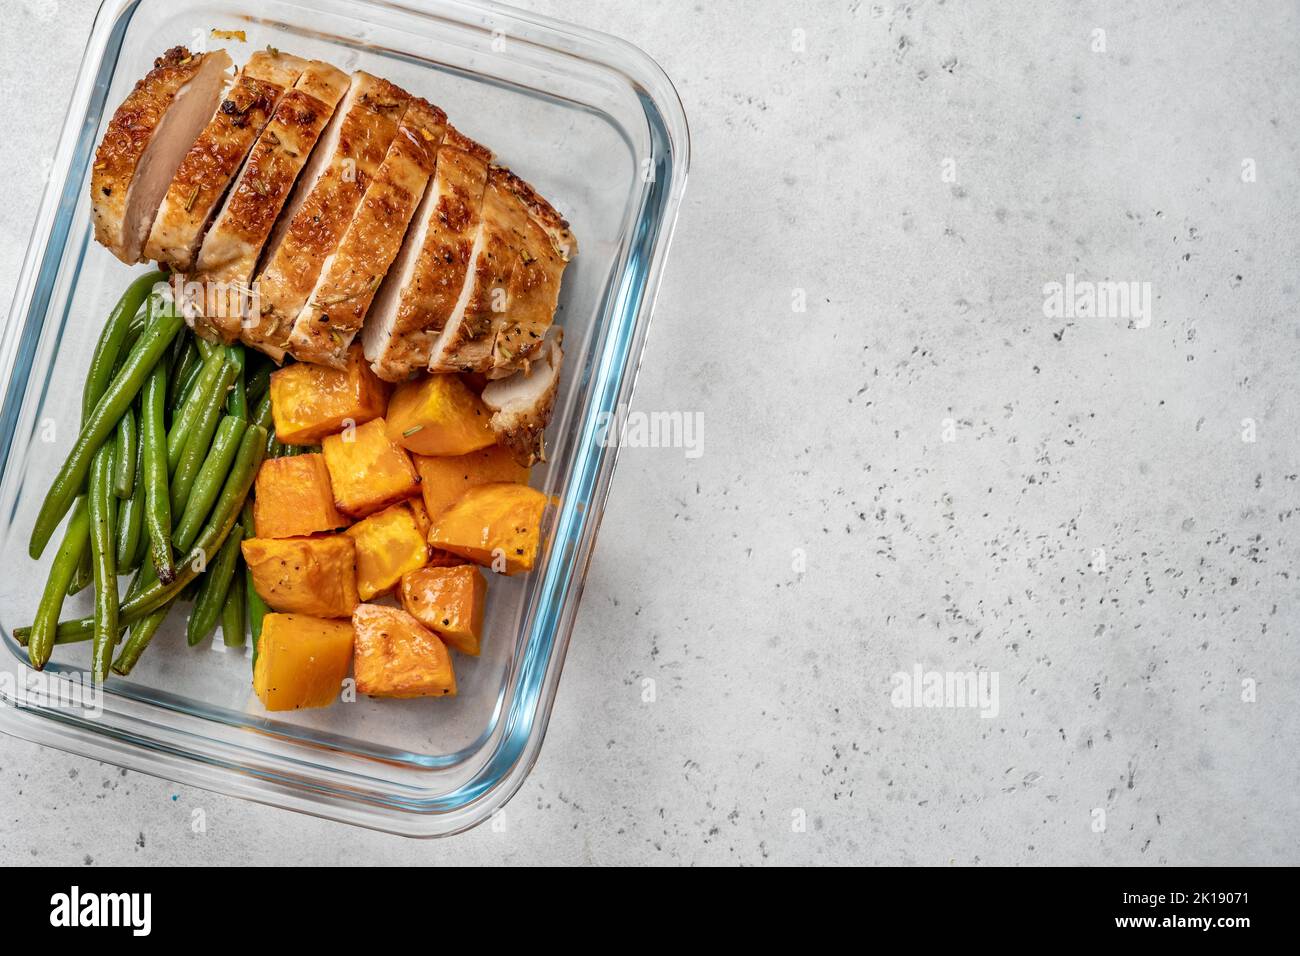 Grilled chicken breast with green beans and sweet potato Stock Photo